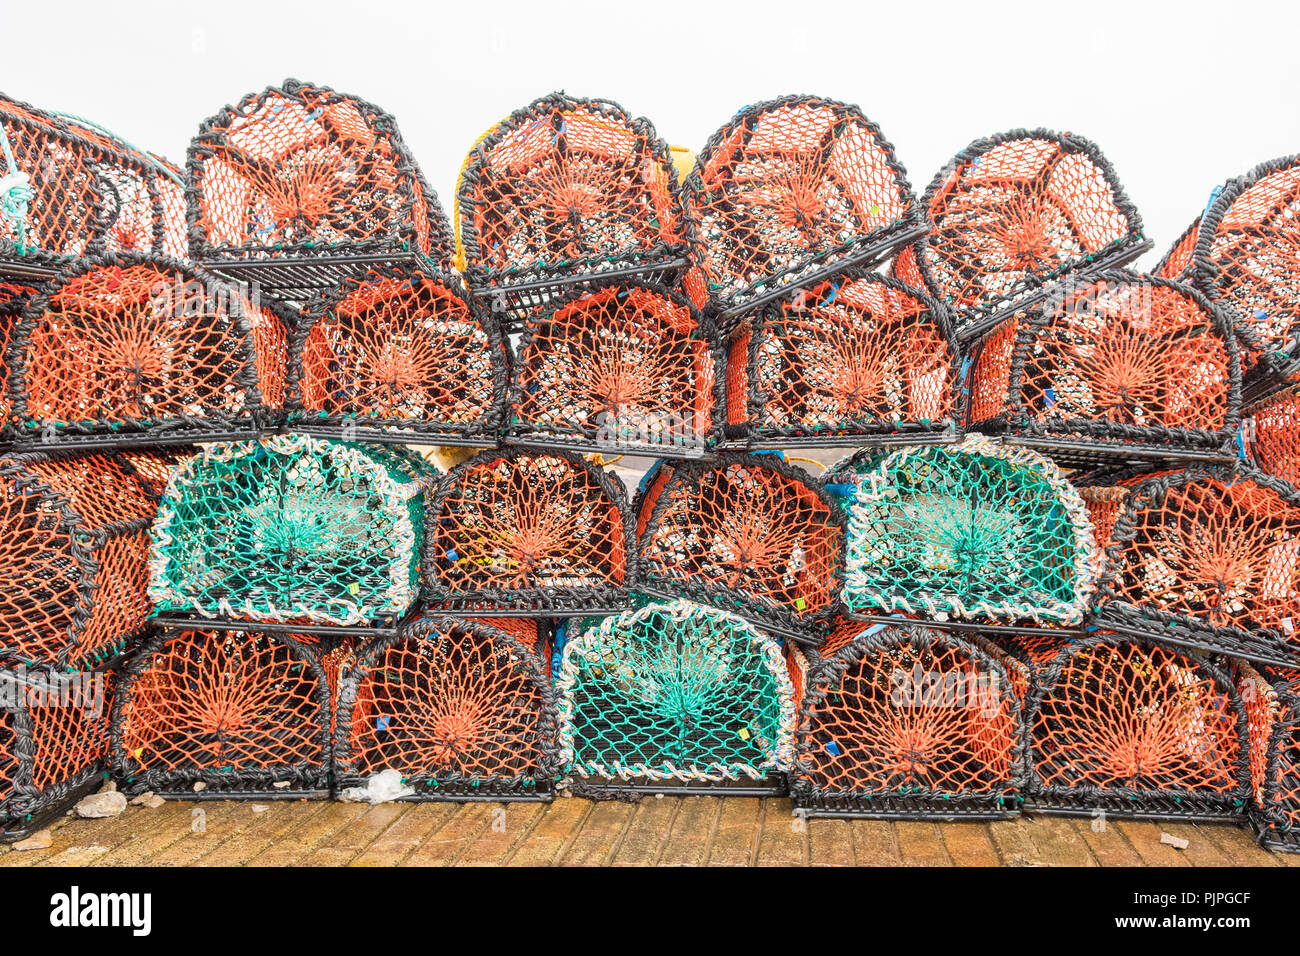 Lobster Pots or Creels Stock Photo